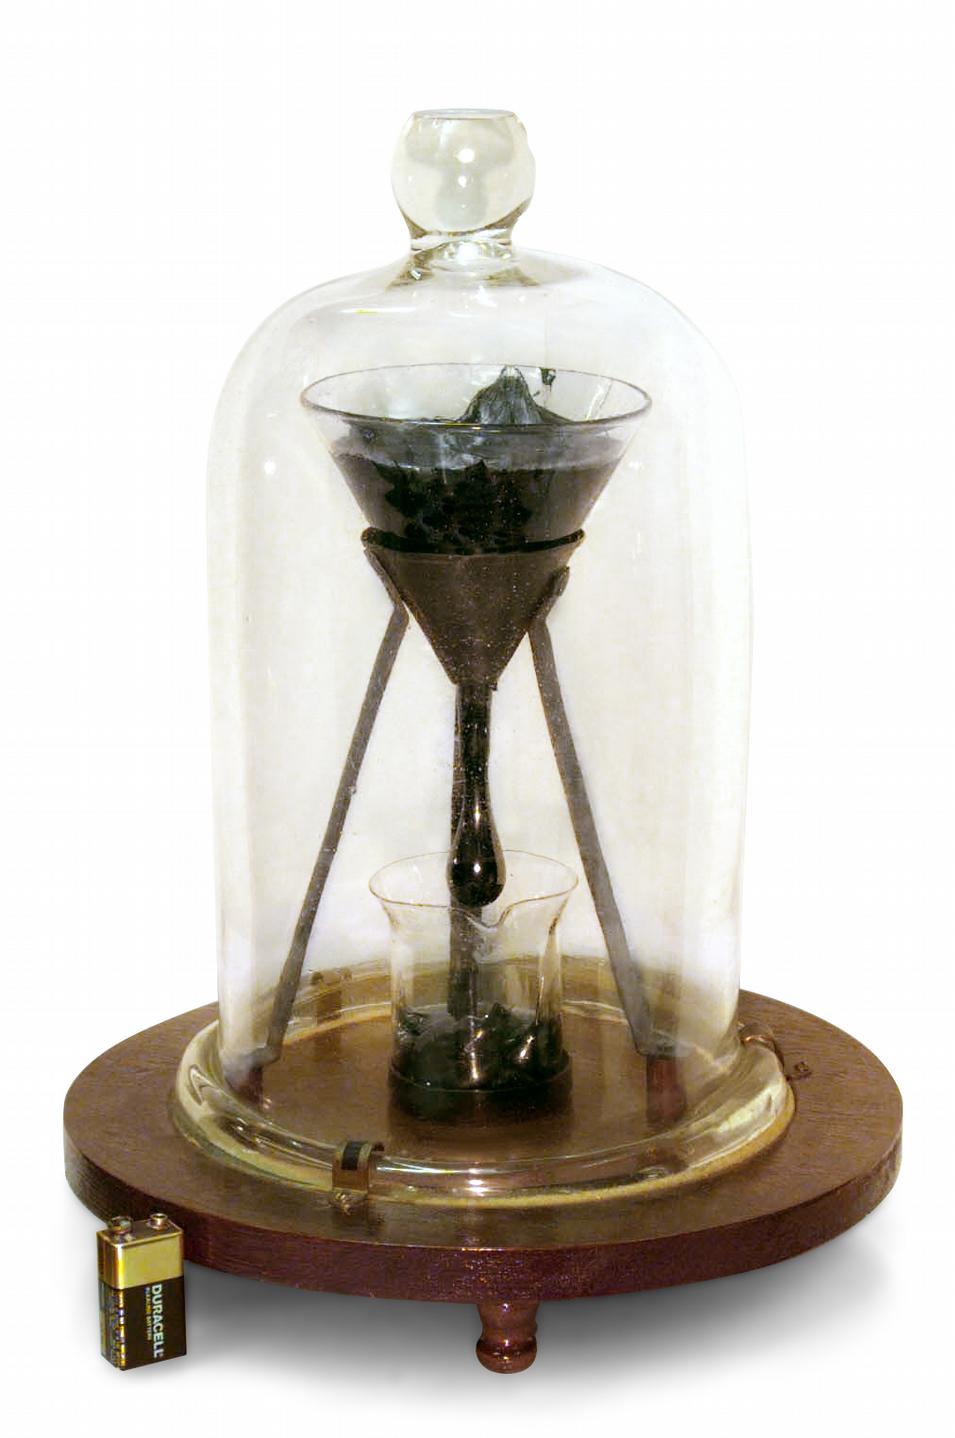 The pitch drop experiment Started in 1927 by Professor Thomas Parnell of the University of Queensland in Brisbane, Australia.